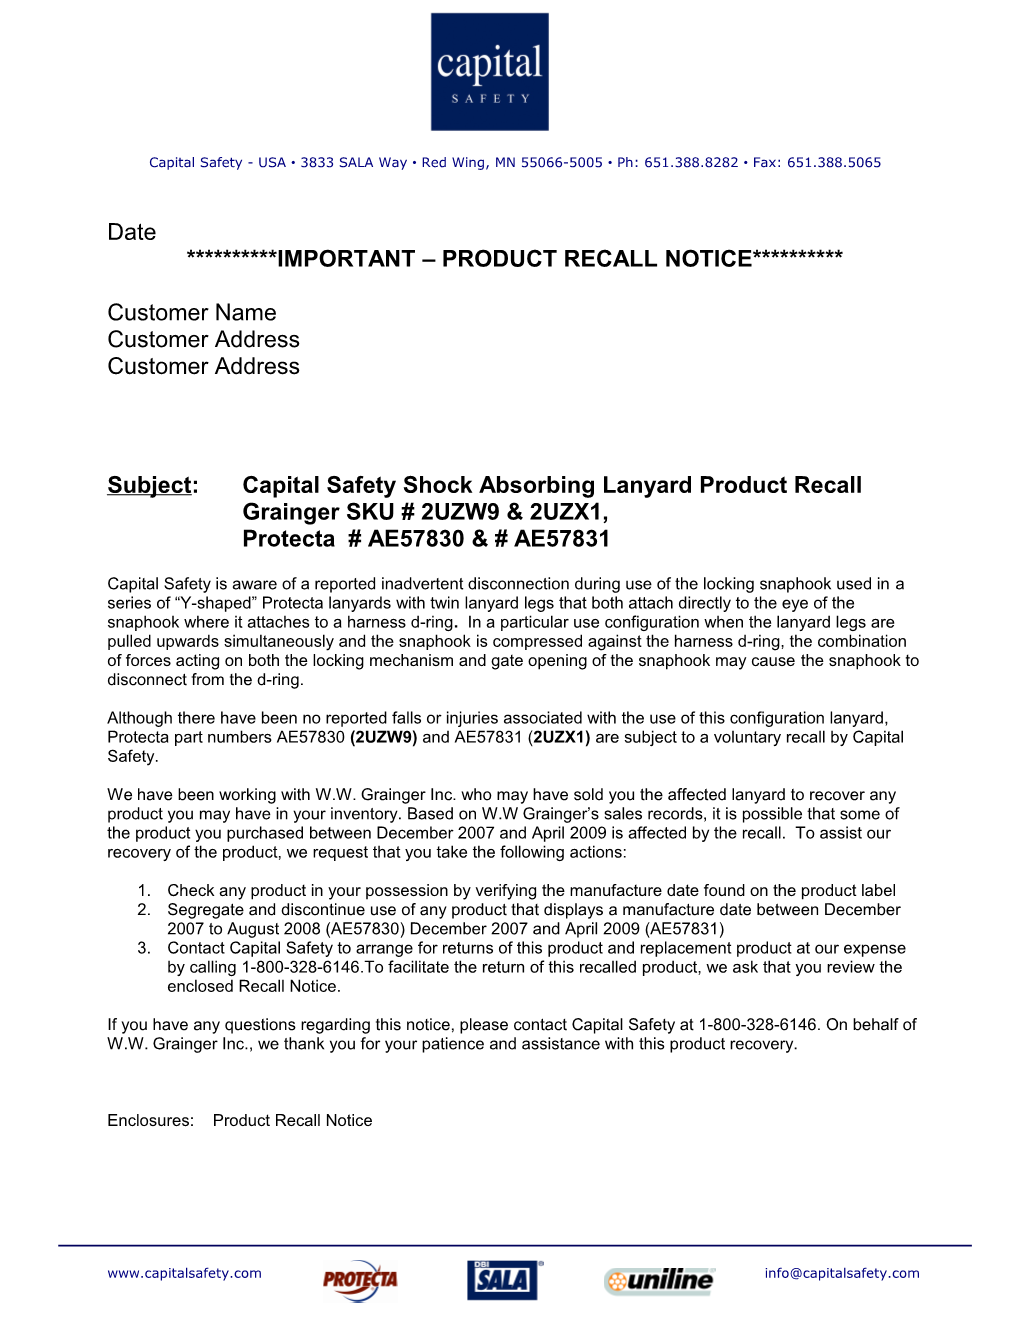 Capital Safety - USA 3833 SALA Way Red Wing, MN 55066-5005 Ph: 651.388.8282 Fax: 651.388.5065